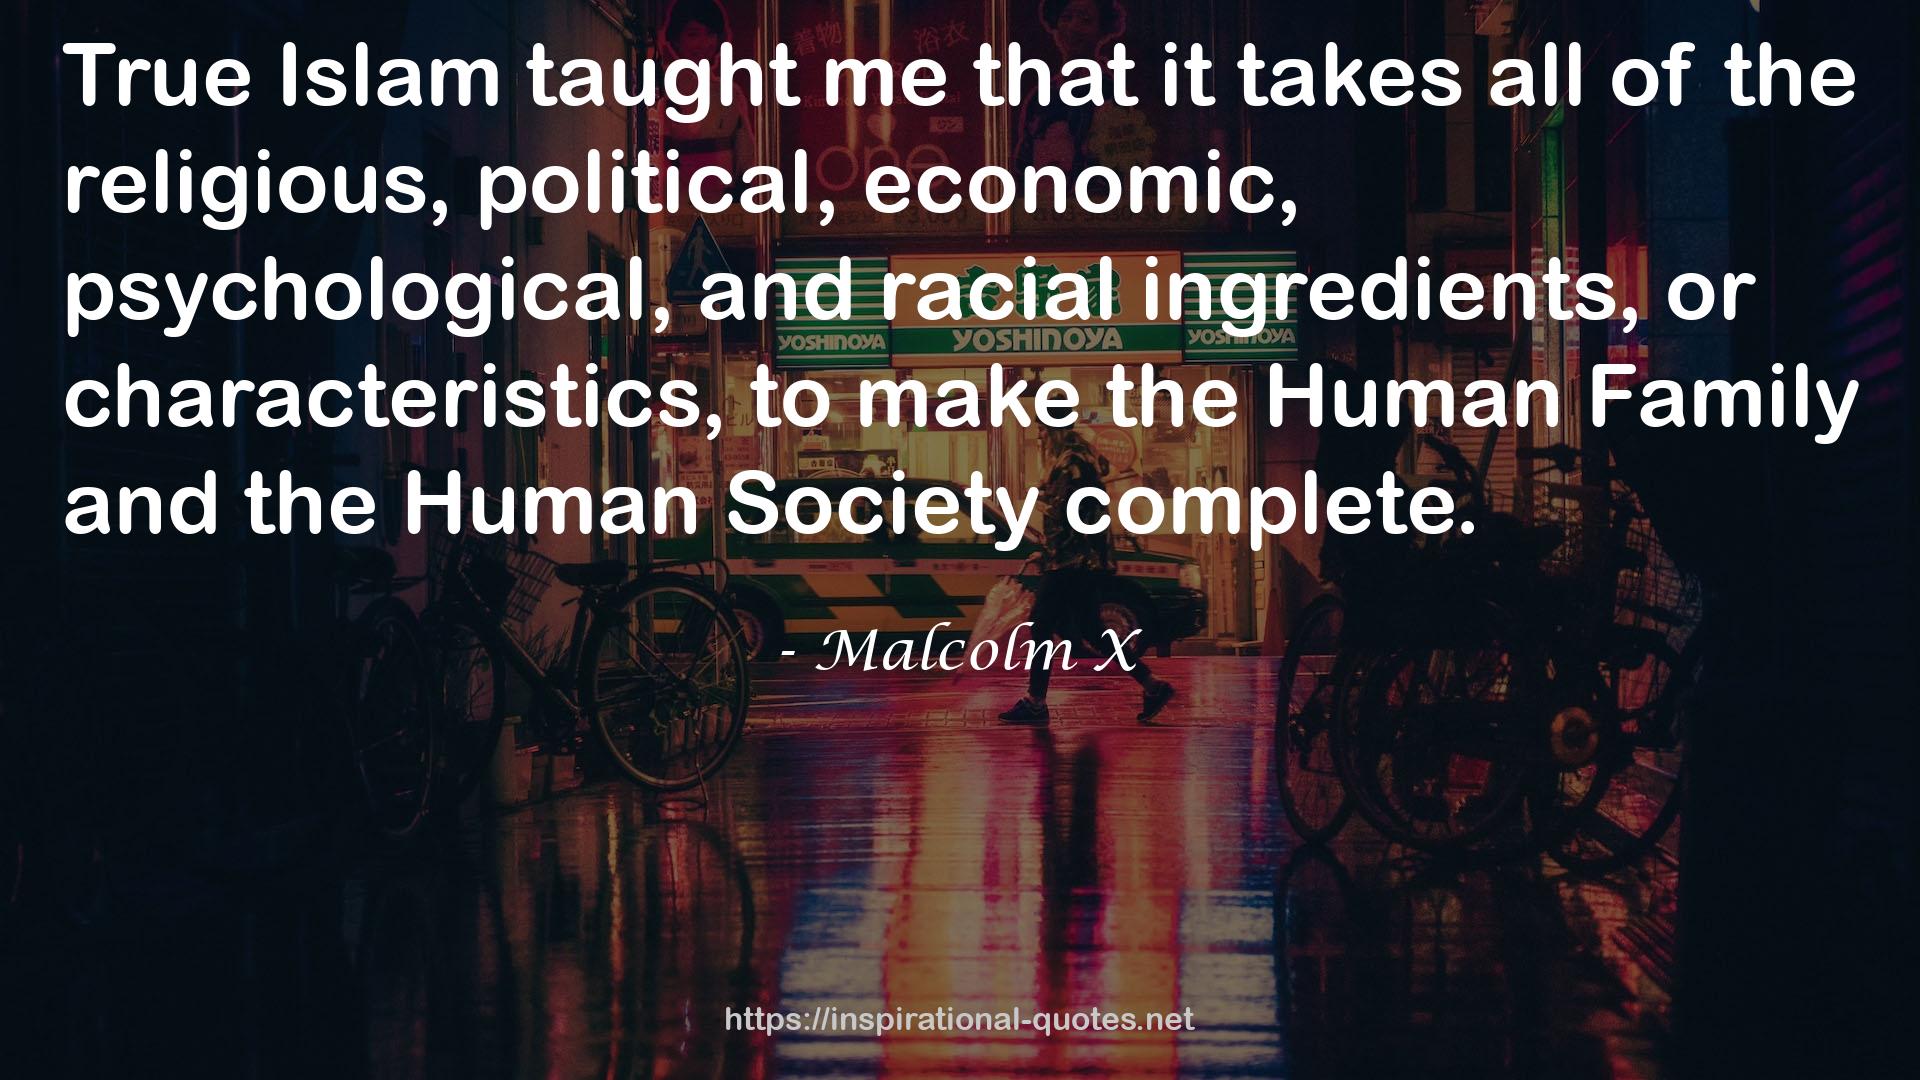 Malcolm X QUOTES